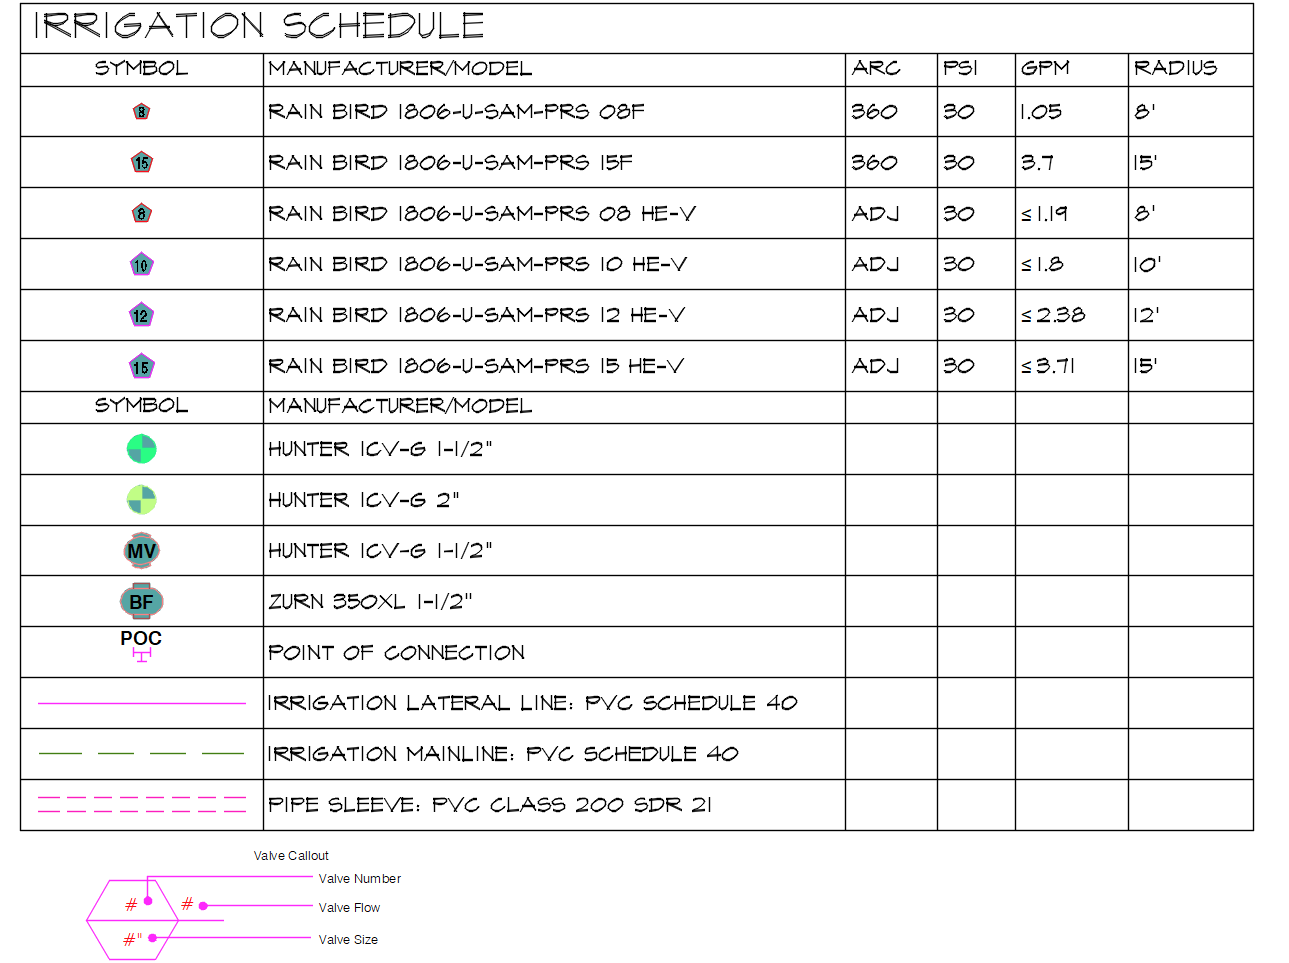 Settings for Irrigation Schedule with plotting gridlines organized By Nozzle, placed in drawing